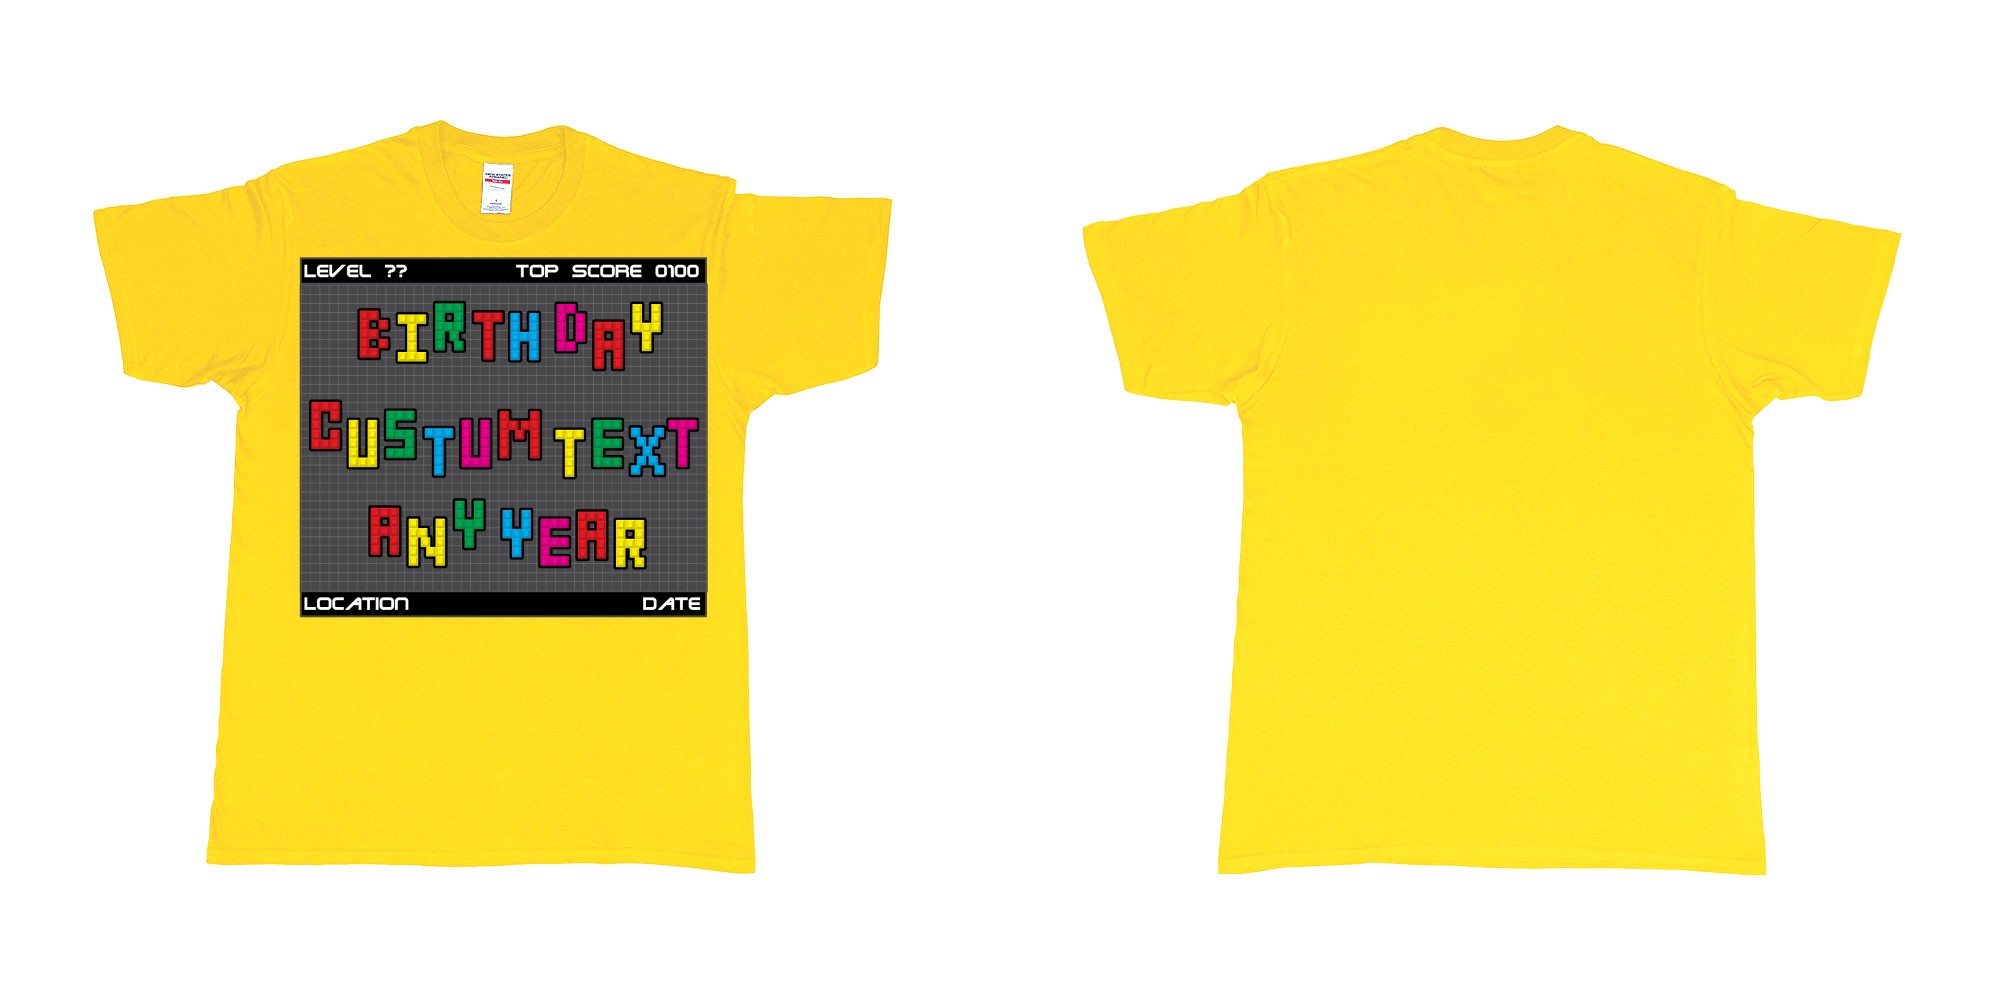 Custom tshirt design tetris block custom text birthday in fabric color daisy choice your own text made in Bali by The Pirate Way